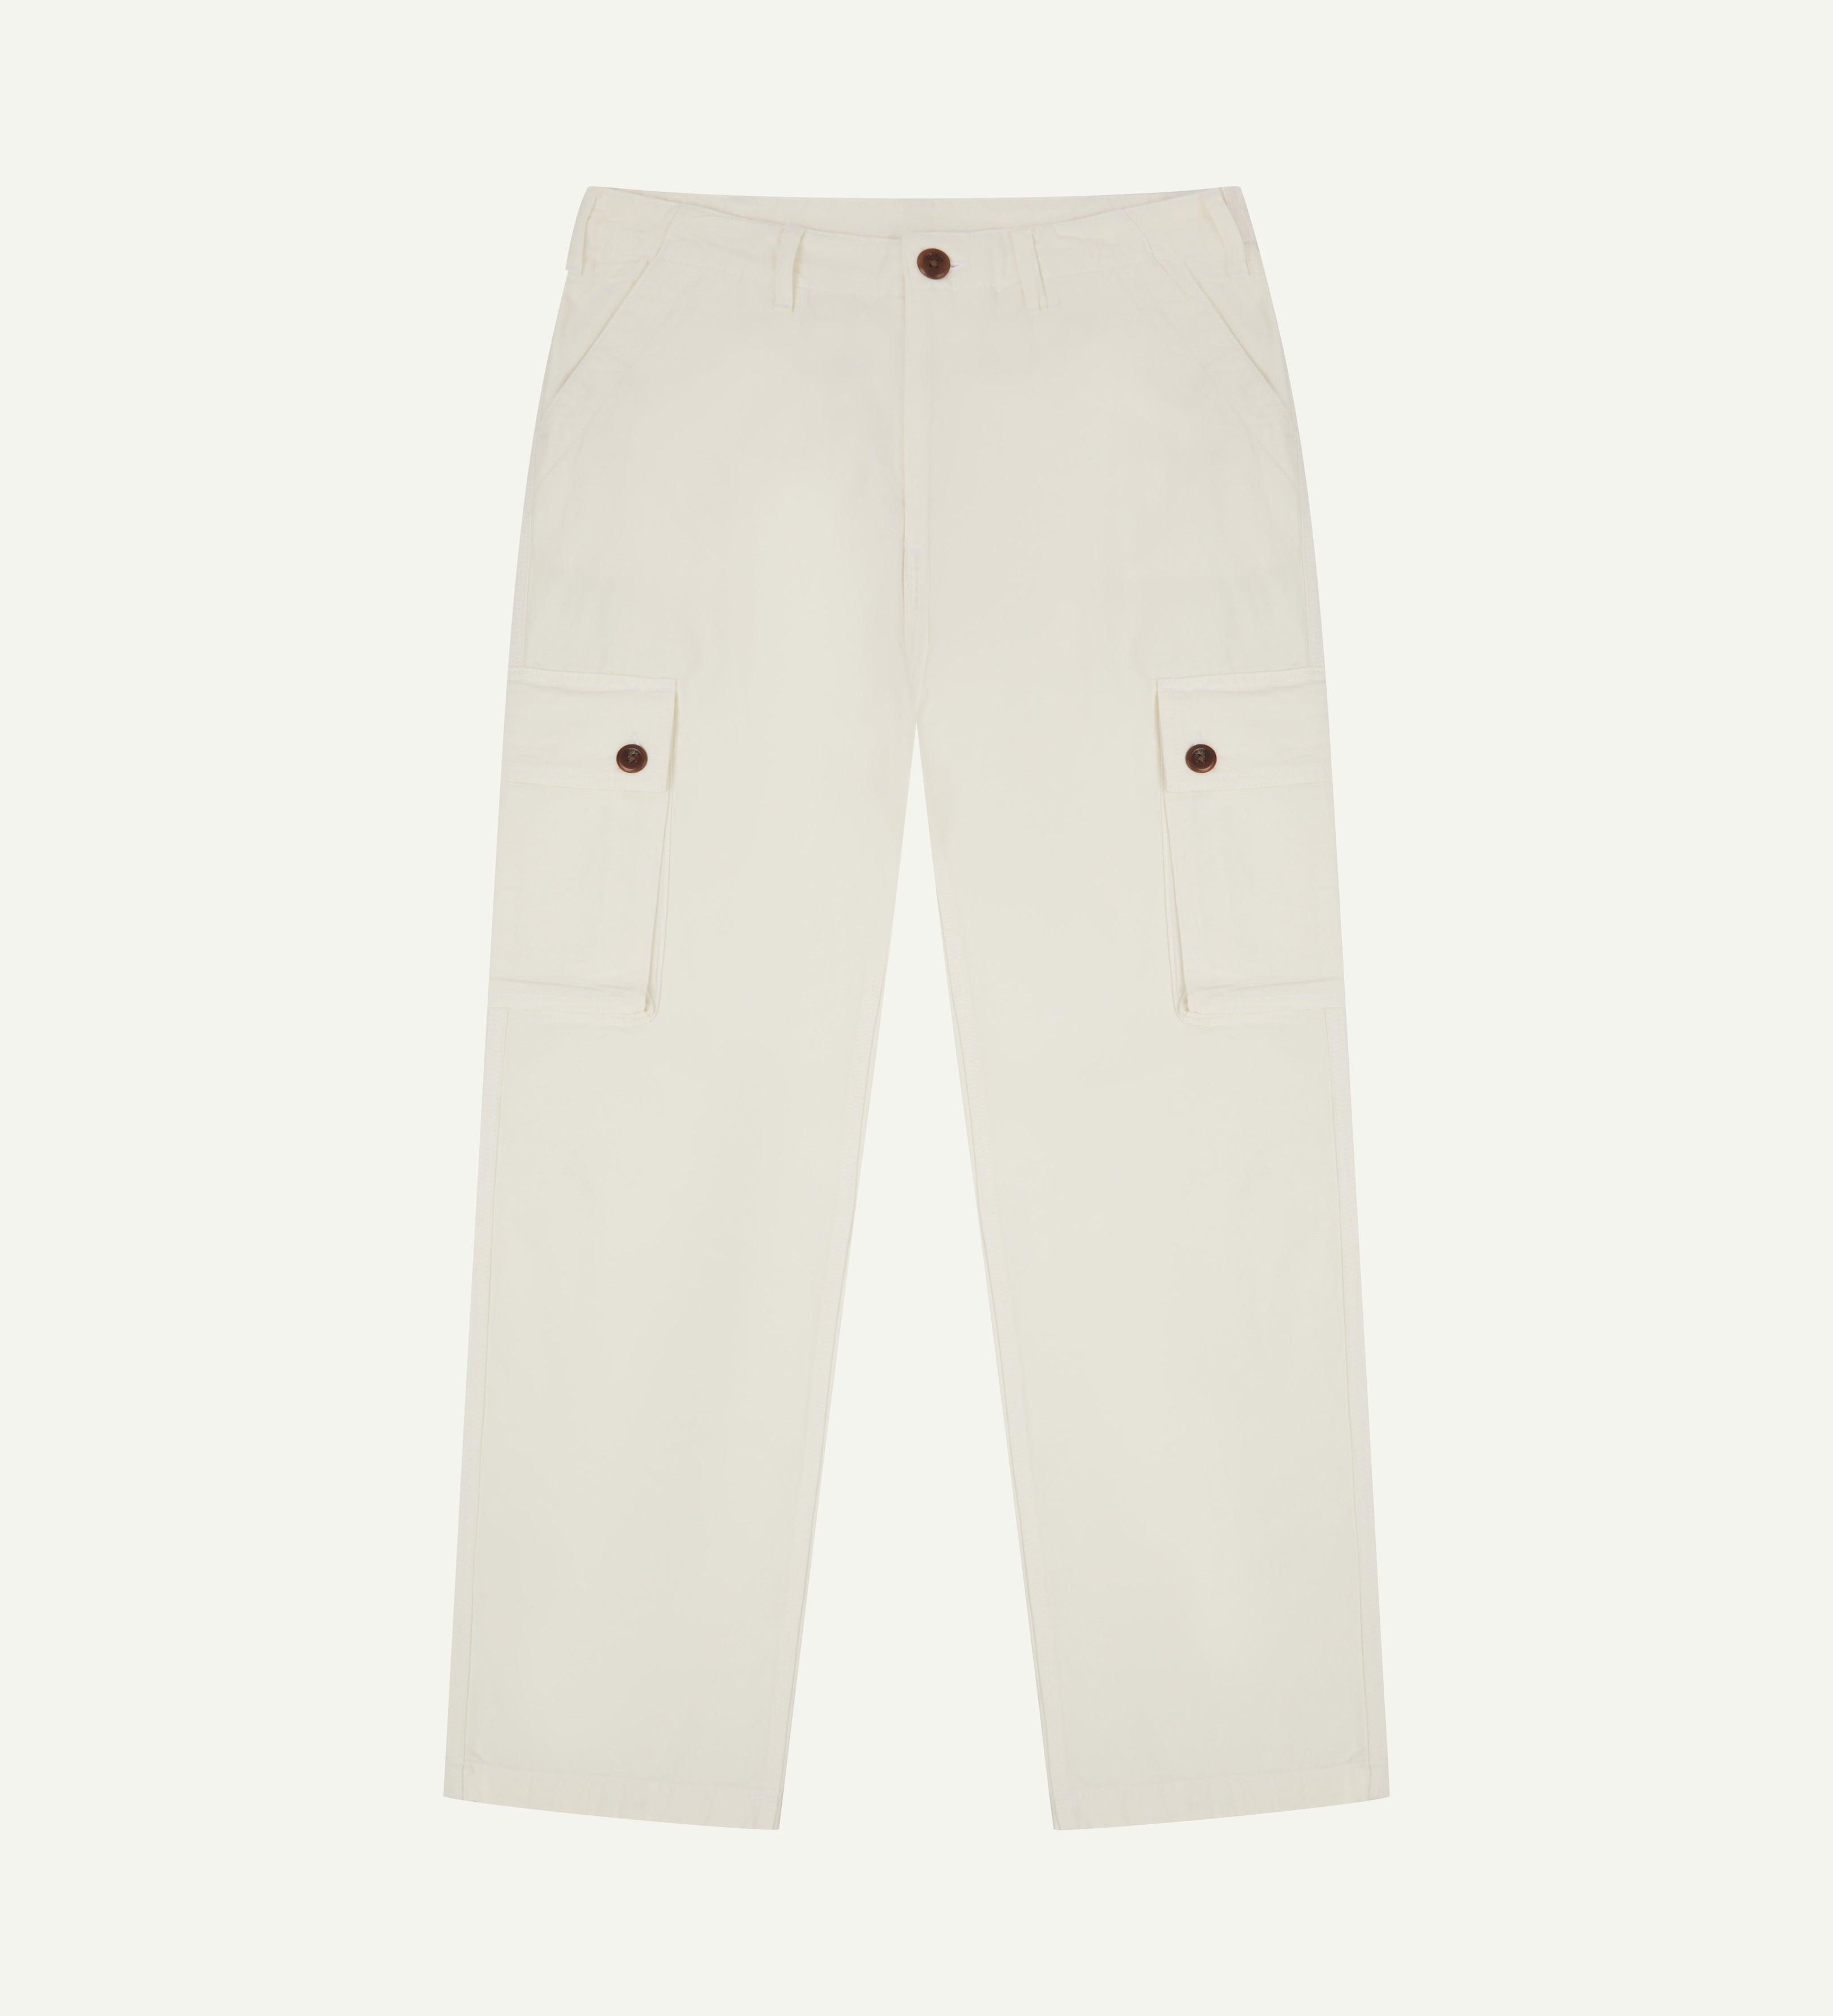 Front flat view of #5014 Uskees men's organic cotton cream cargo trousers showing contrast brown corozo buttons on pockets